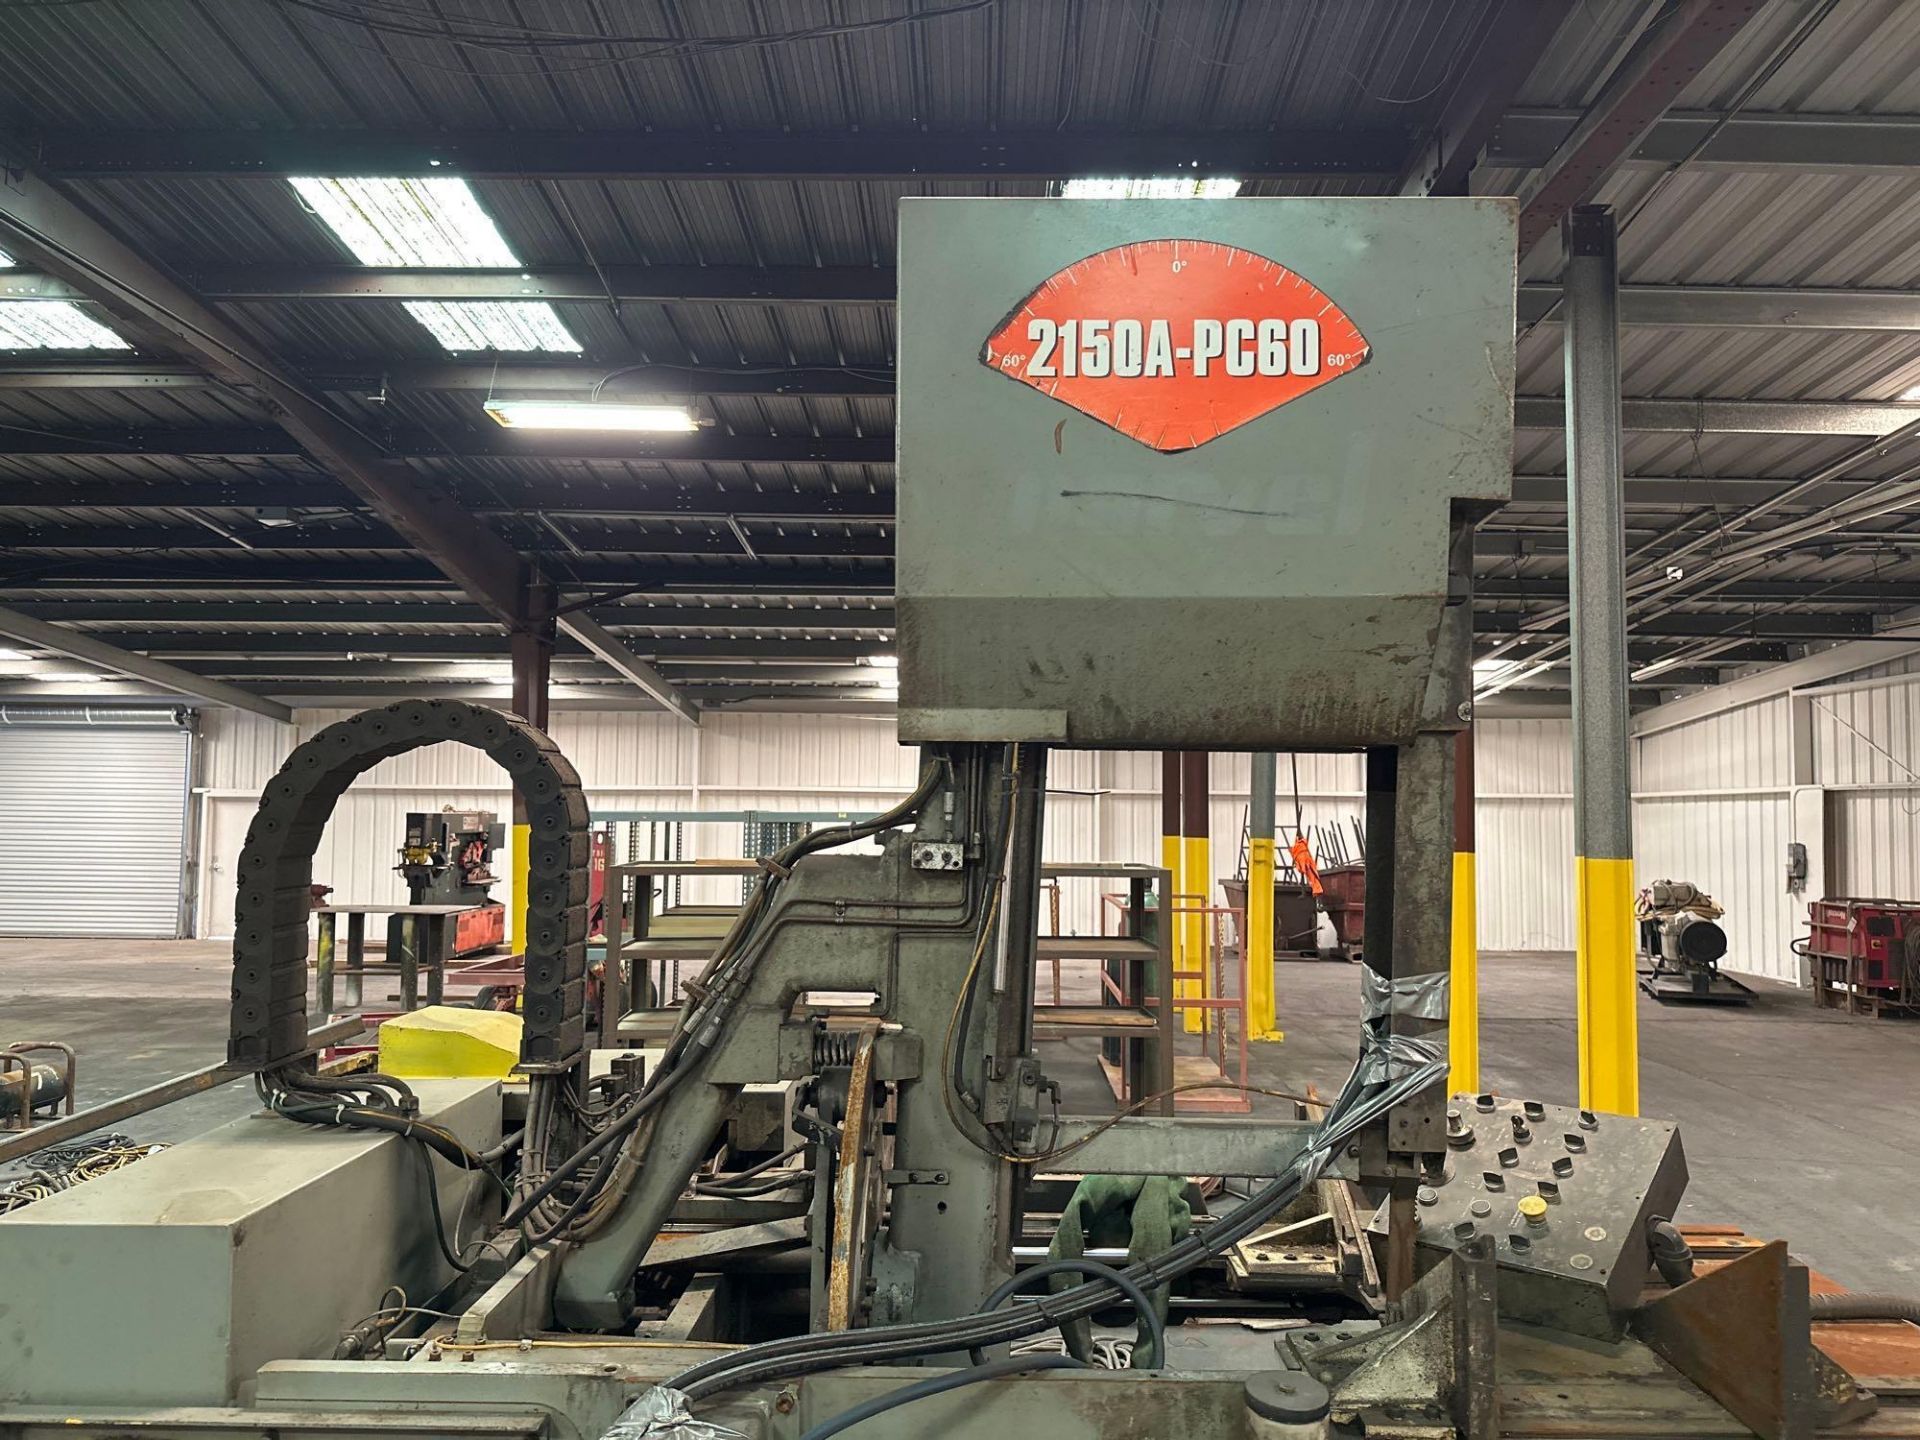 Marvel Series 2150A-PC60 Tilt Frame Vertical Band Saw, 2’ x 7’ Conveyor *Located in Redlands, CA* - Image 8 of 25